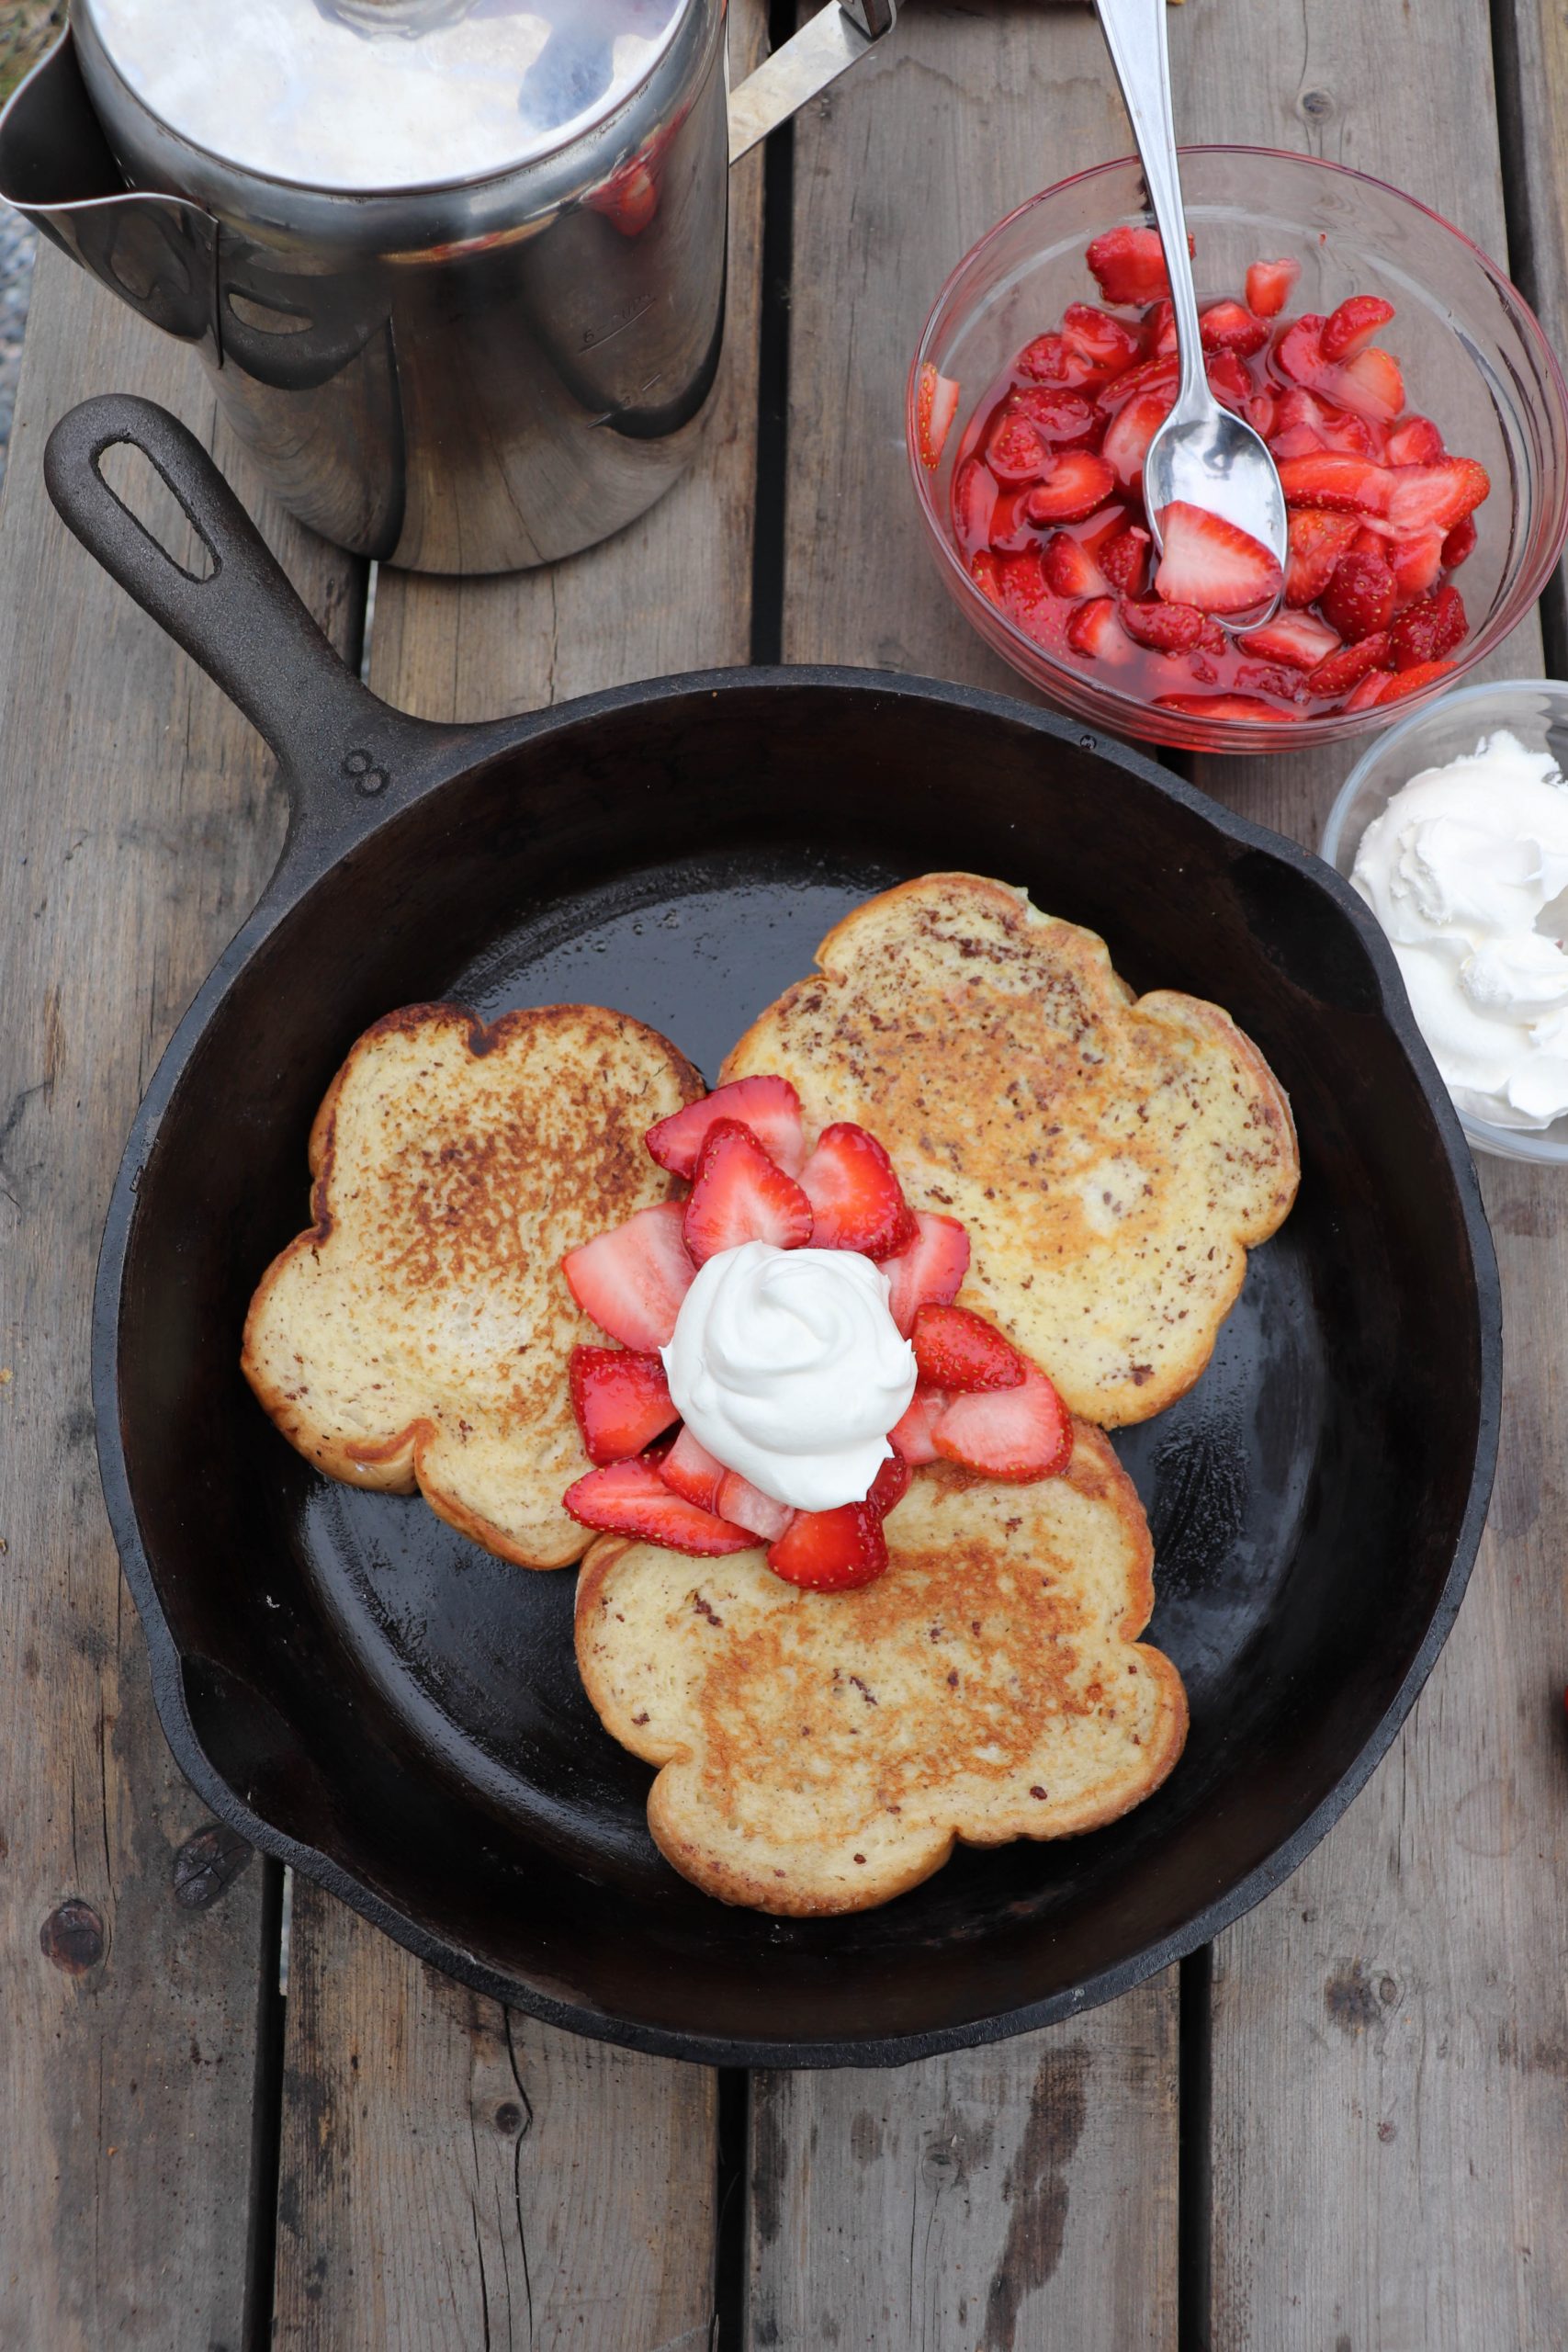 https://campfirefoodie.com/wp-content/uploads/2021/03/Skillet-French-Toast-Recipe-13-scaled.jpg